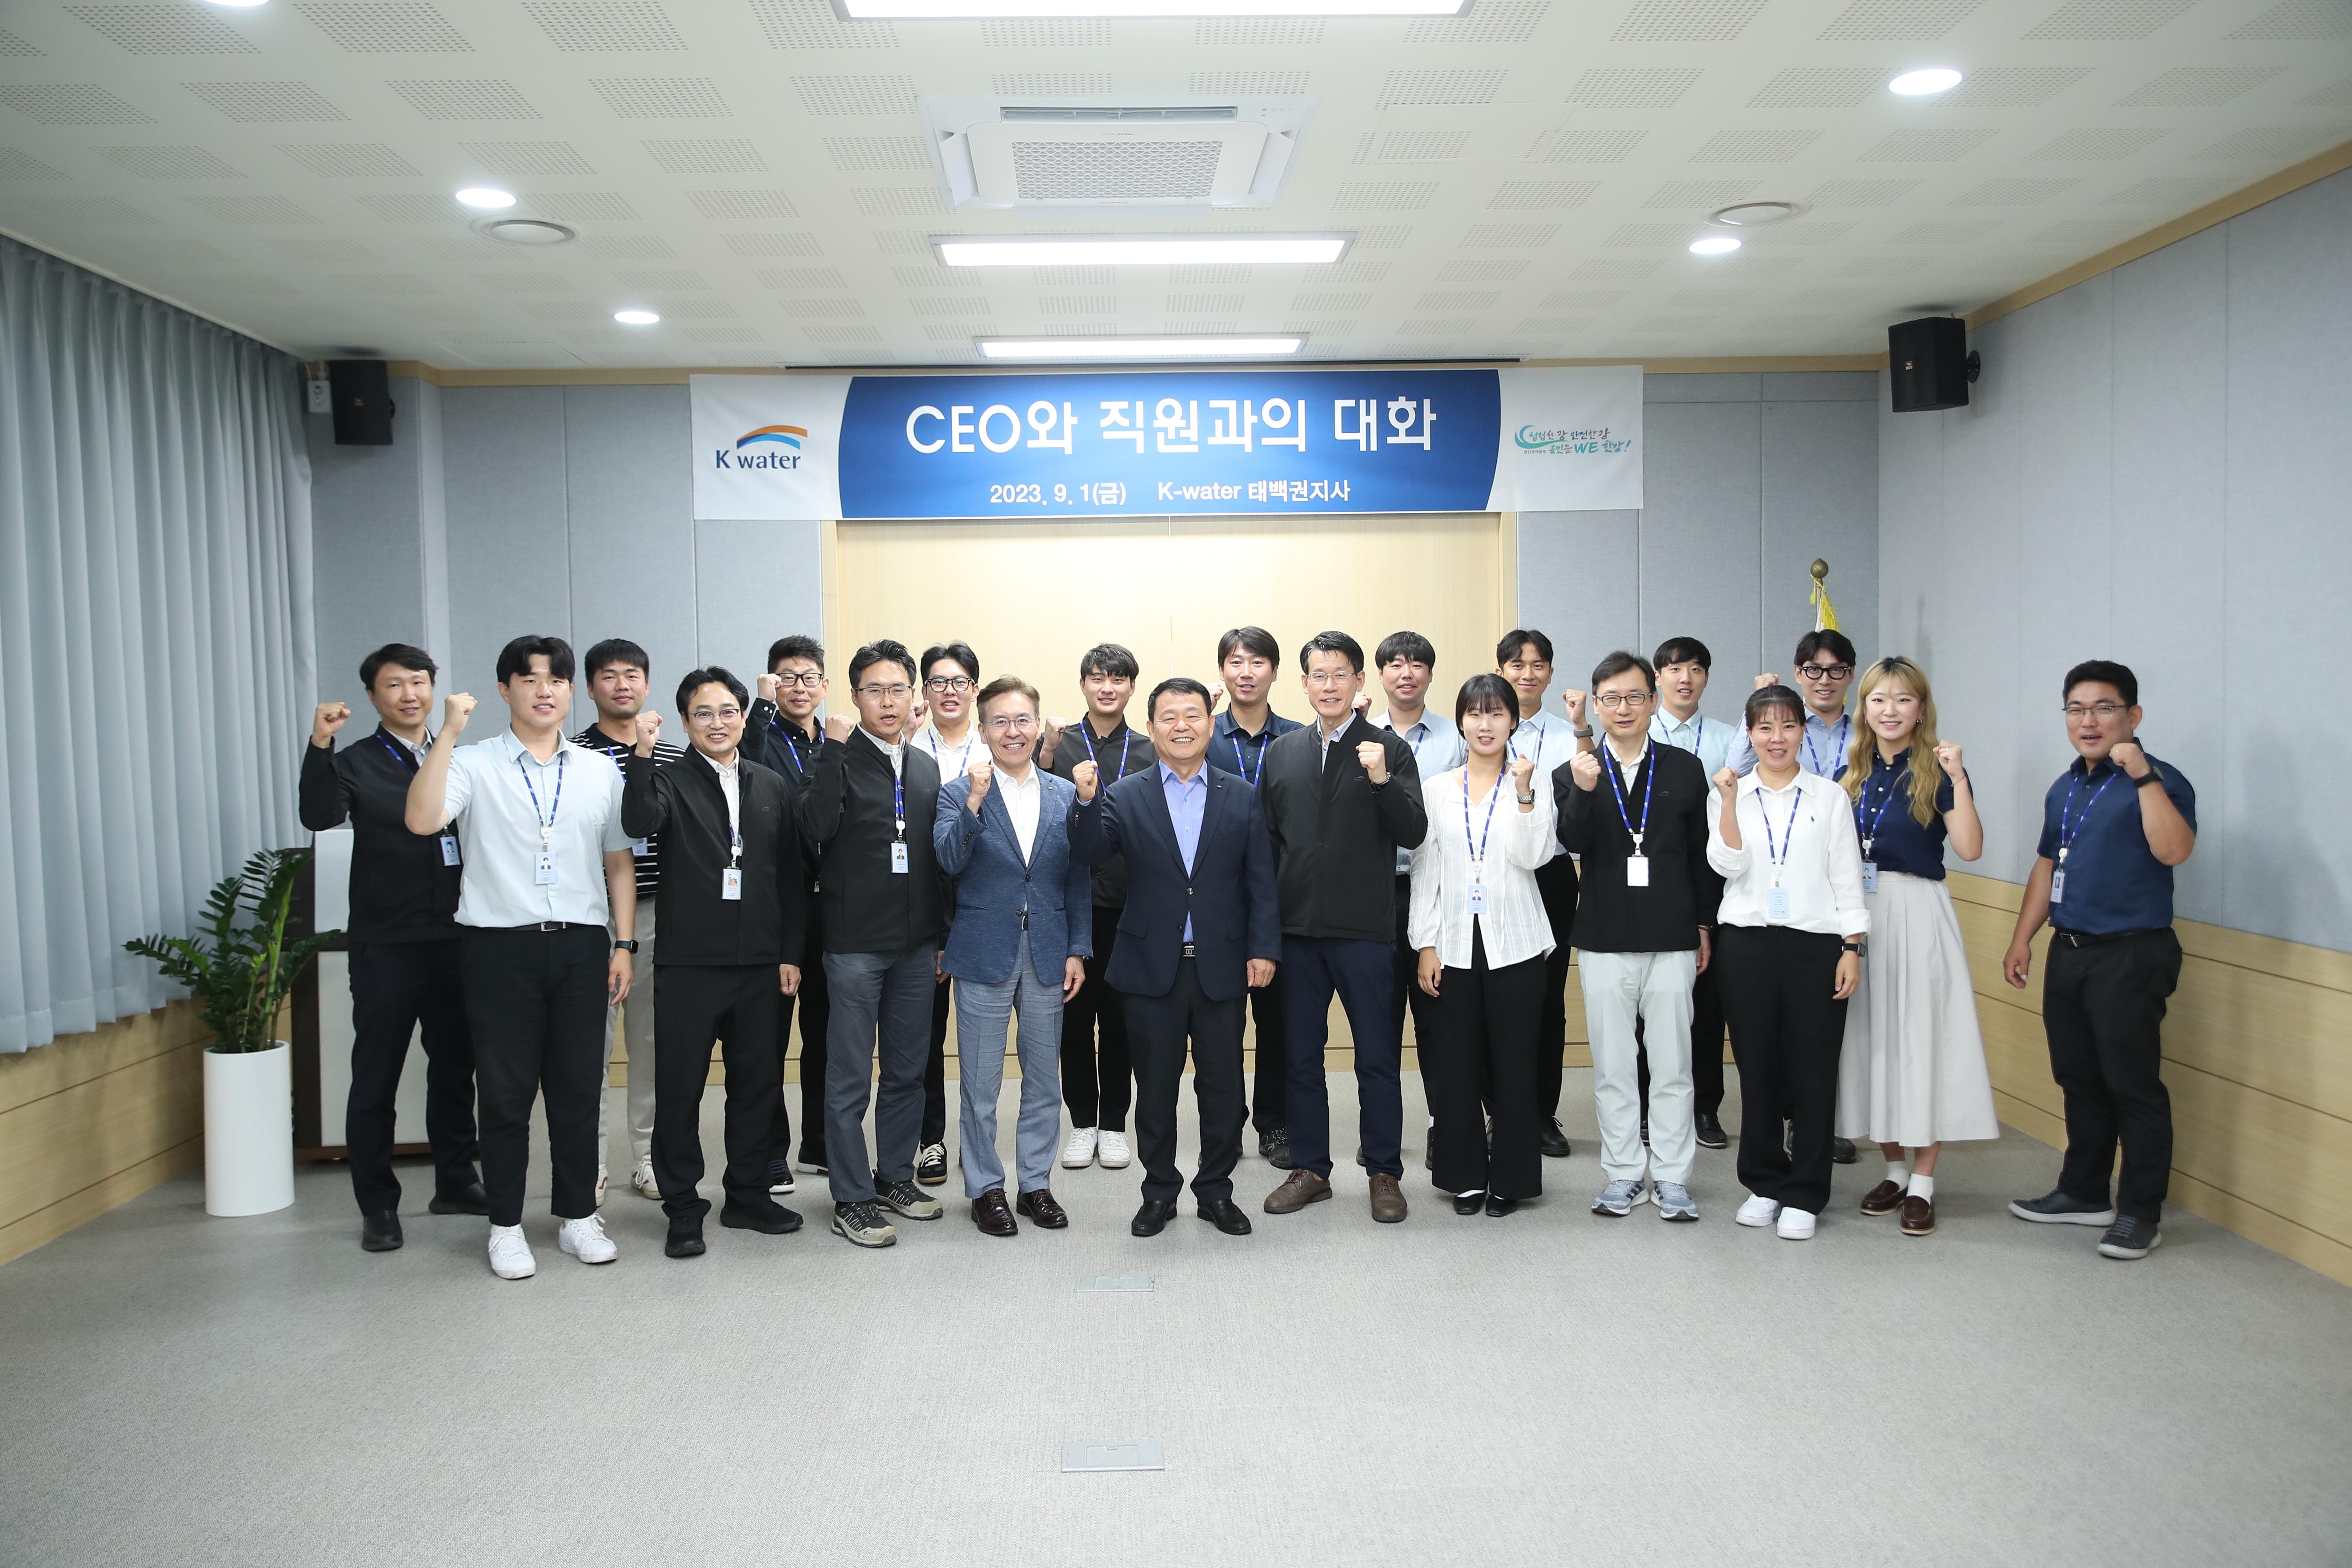 CEO Visits the Taebaek Branch Office